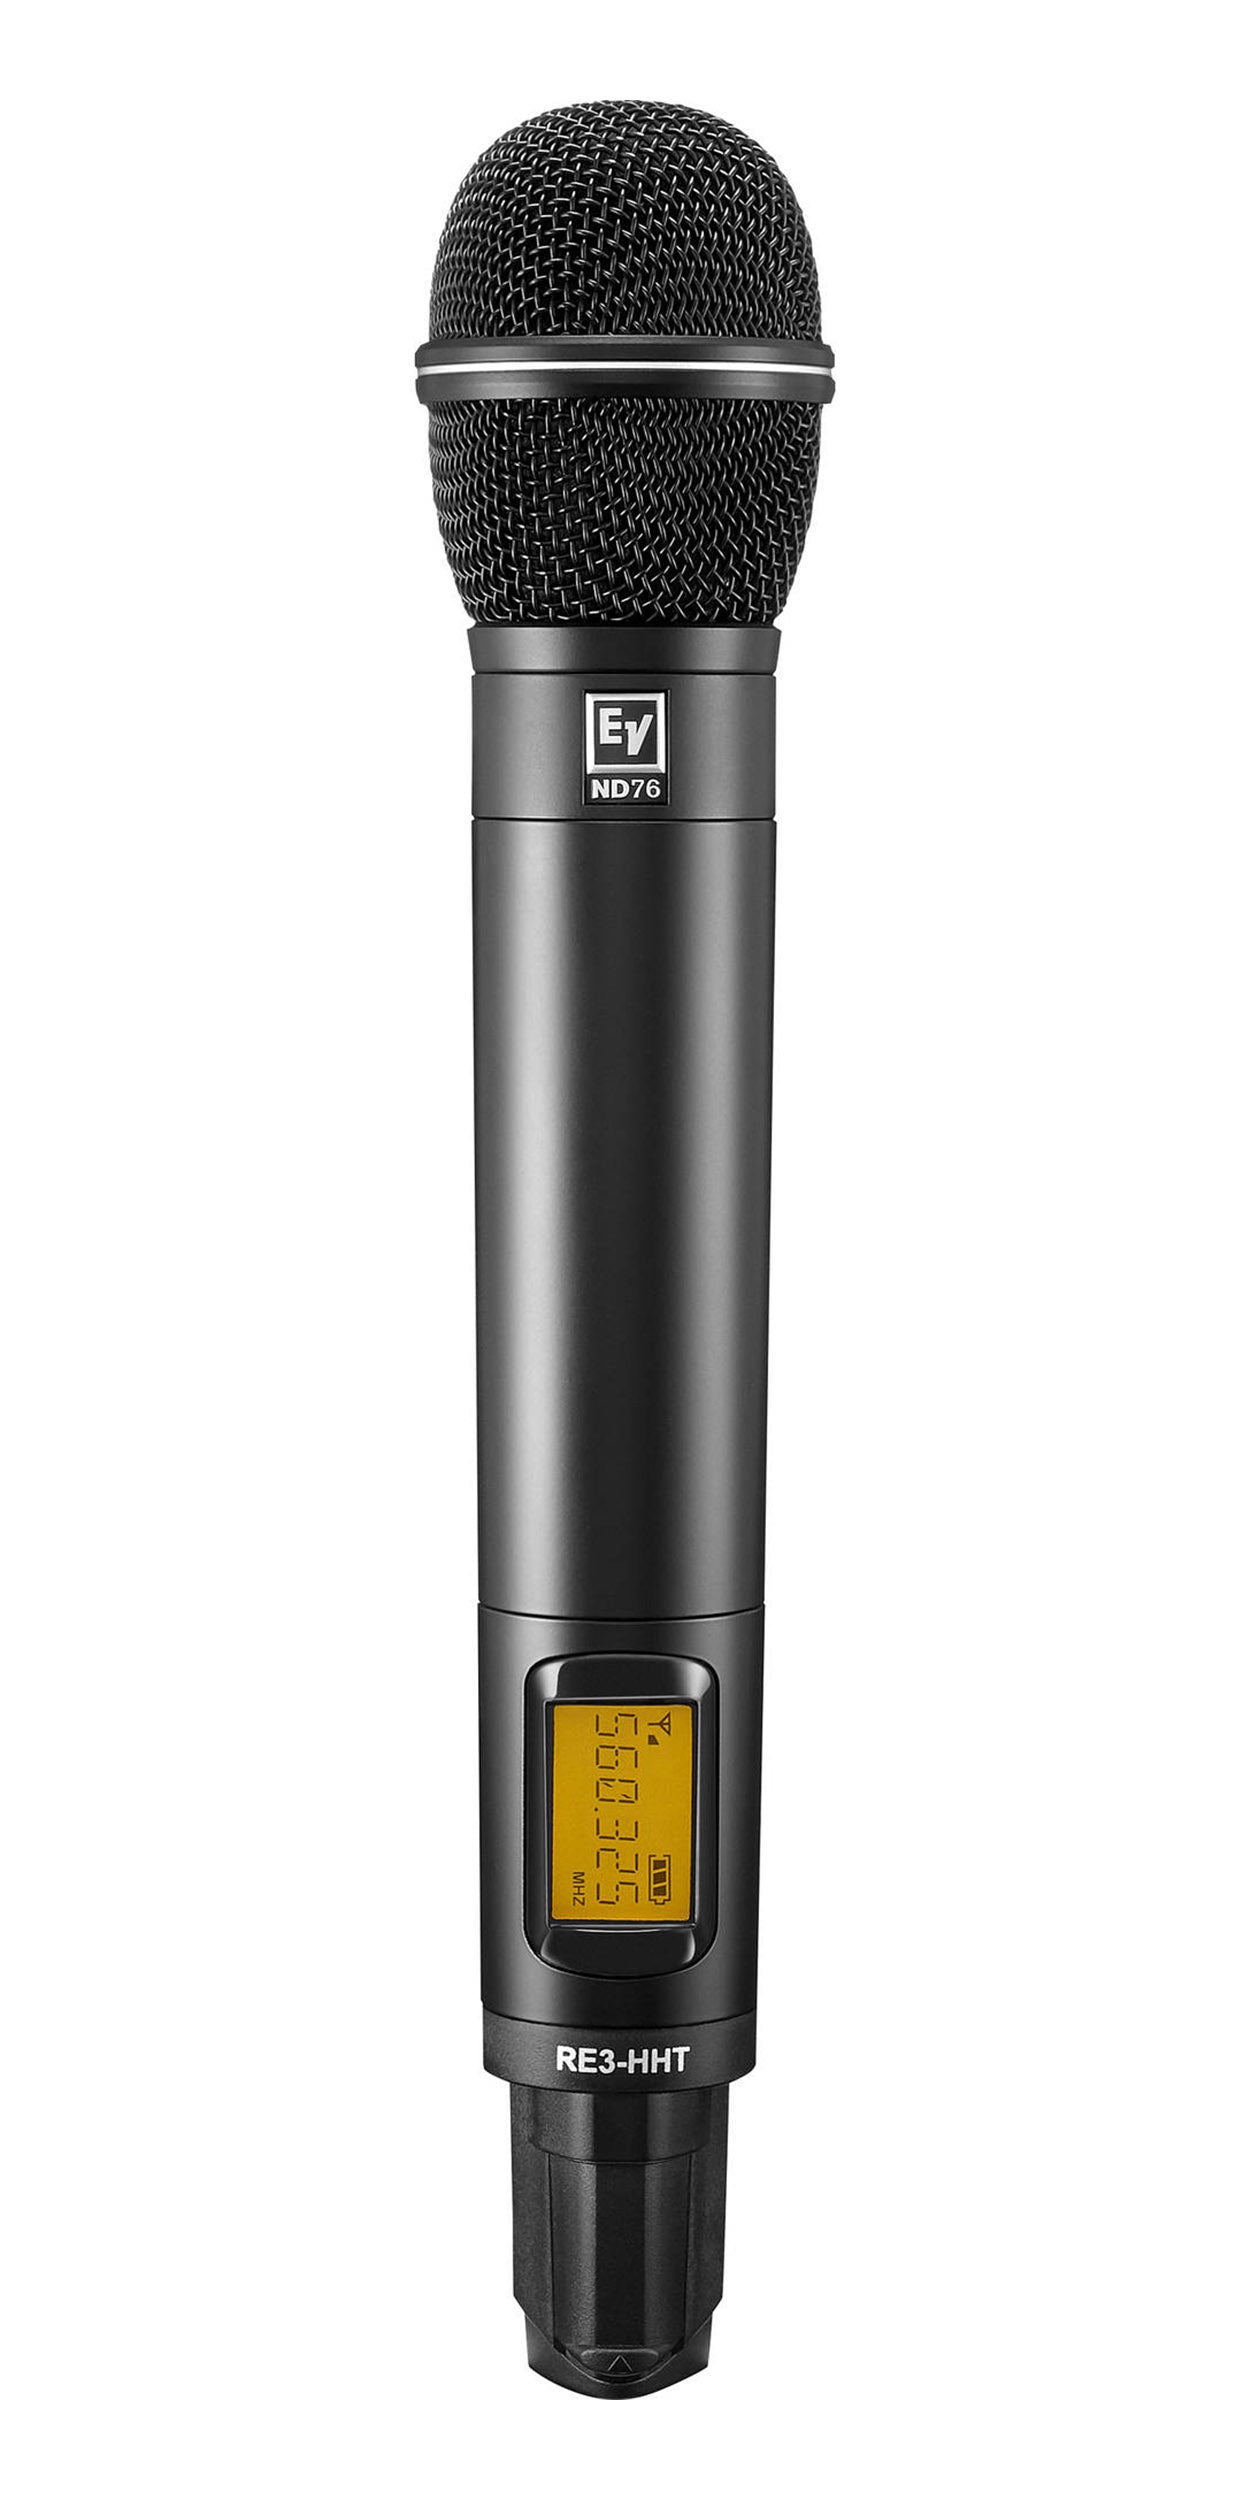 Electro-Voice RE3-ND76-5L, Wireless Handheld Microphone System with ND76 Wireless Mic - 5L: 488 to 524 MHz Electro-Voice